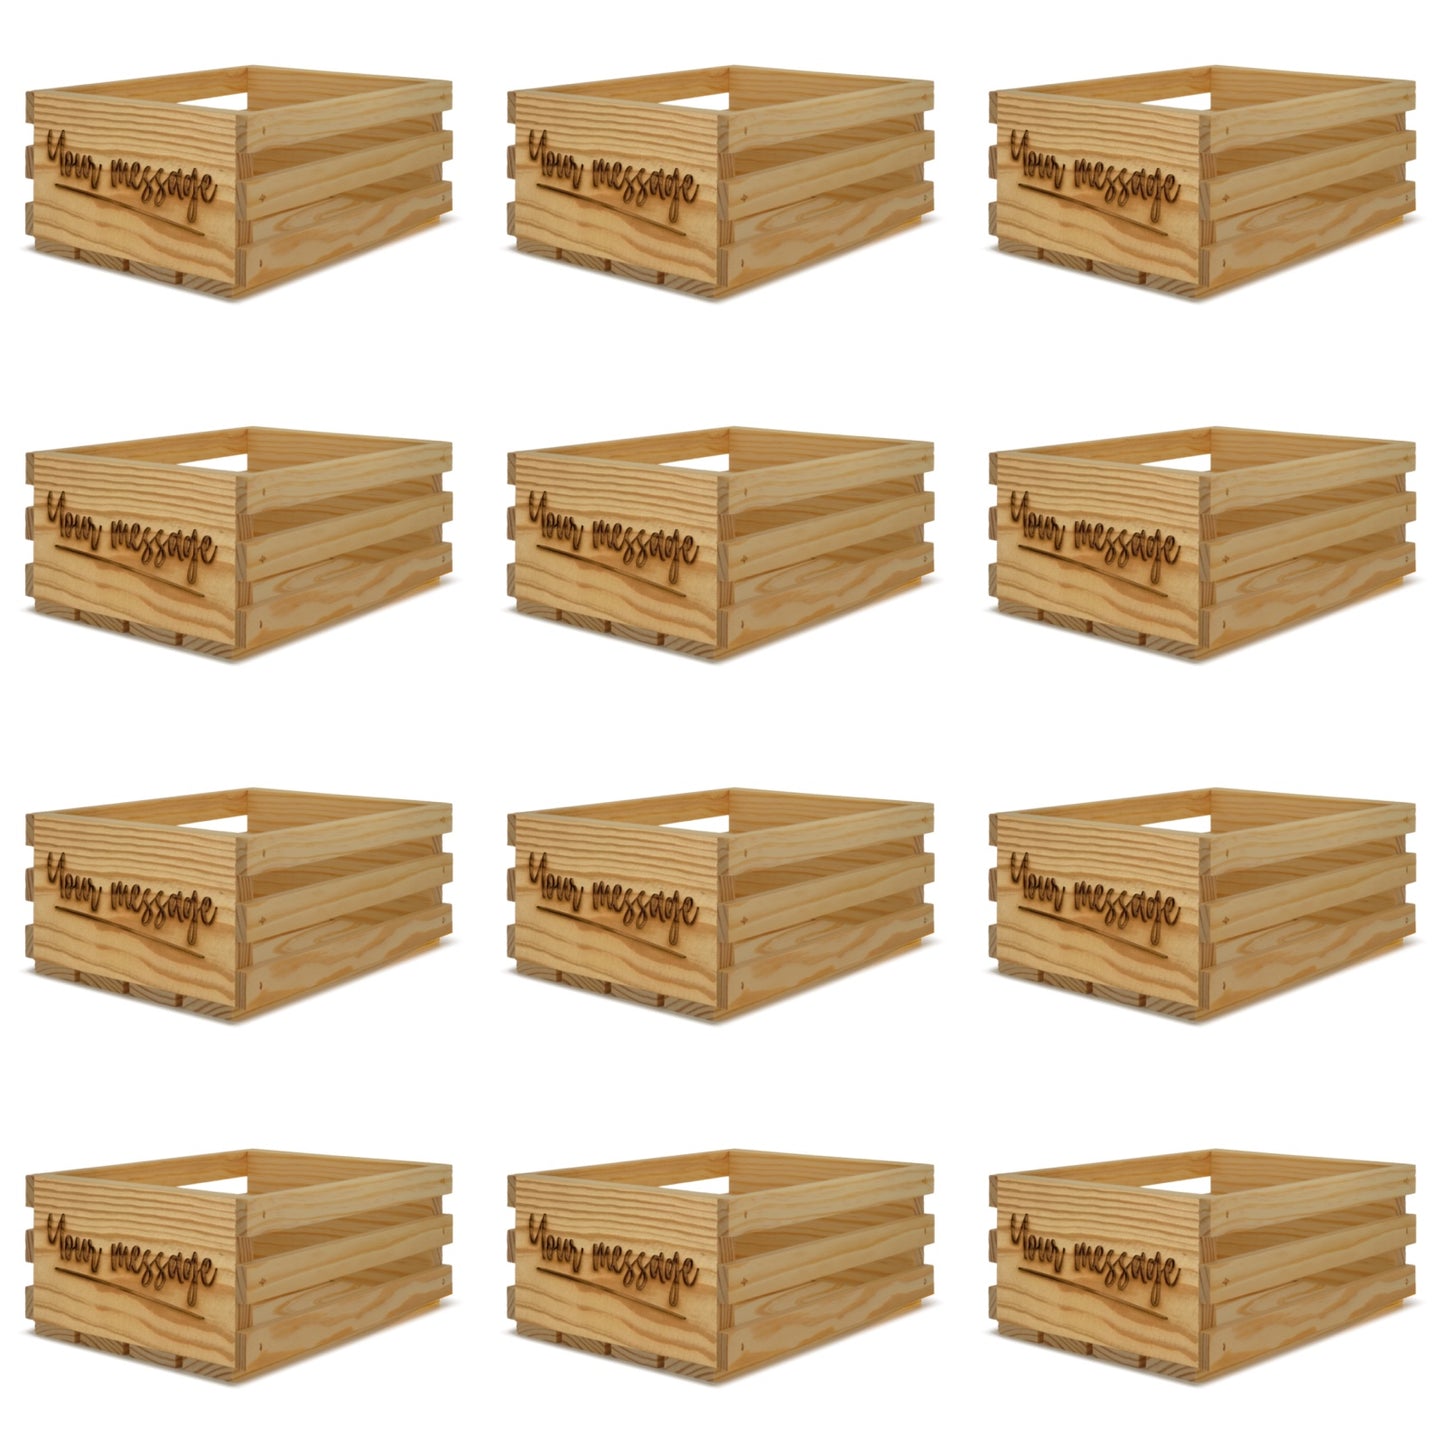 12 Small wooden crates 10x8x4.5 with your custom message